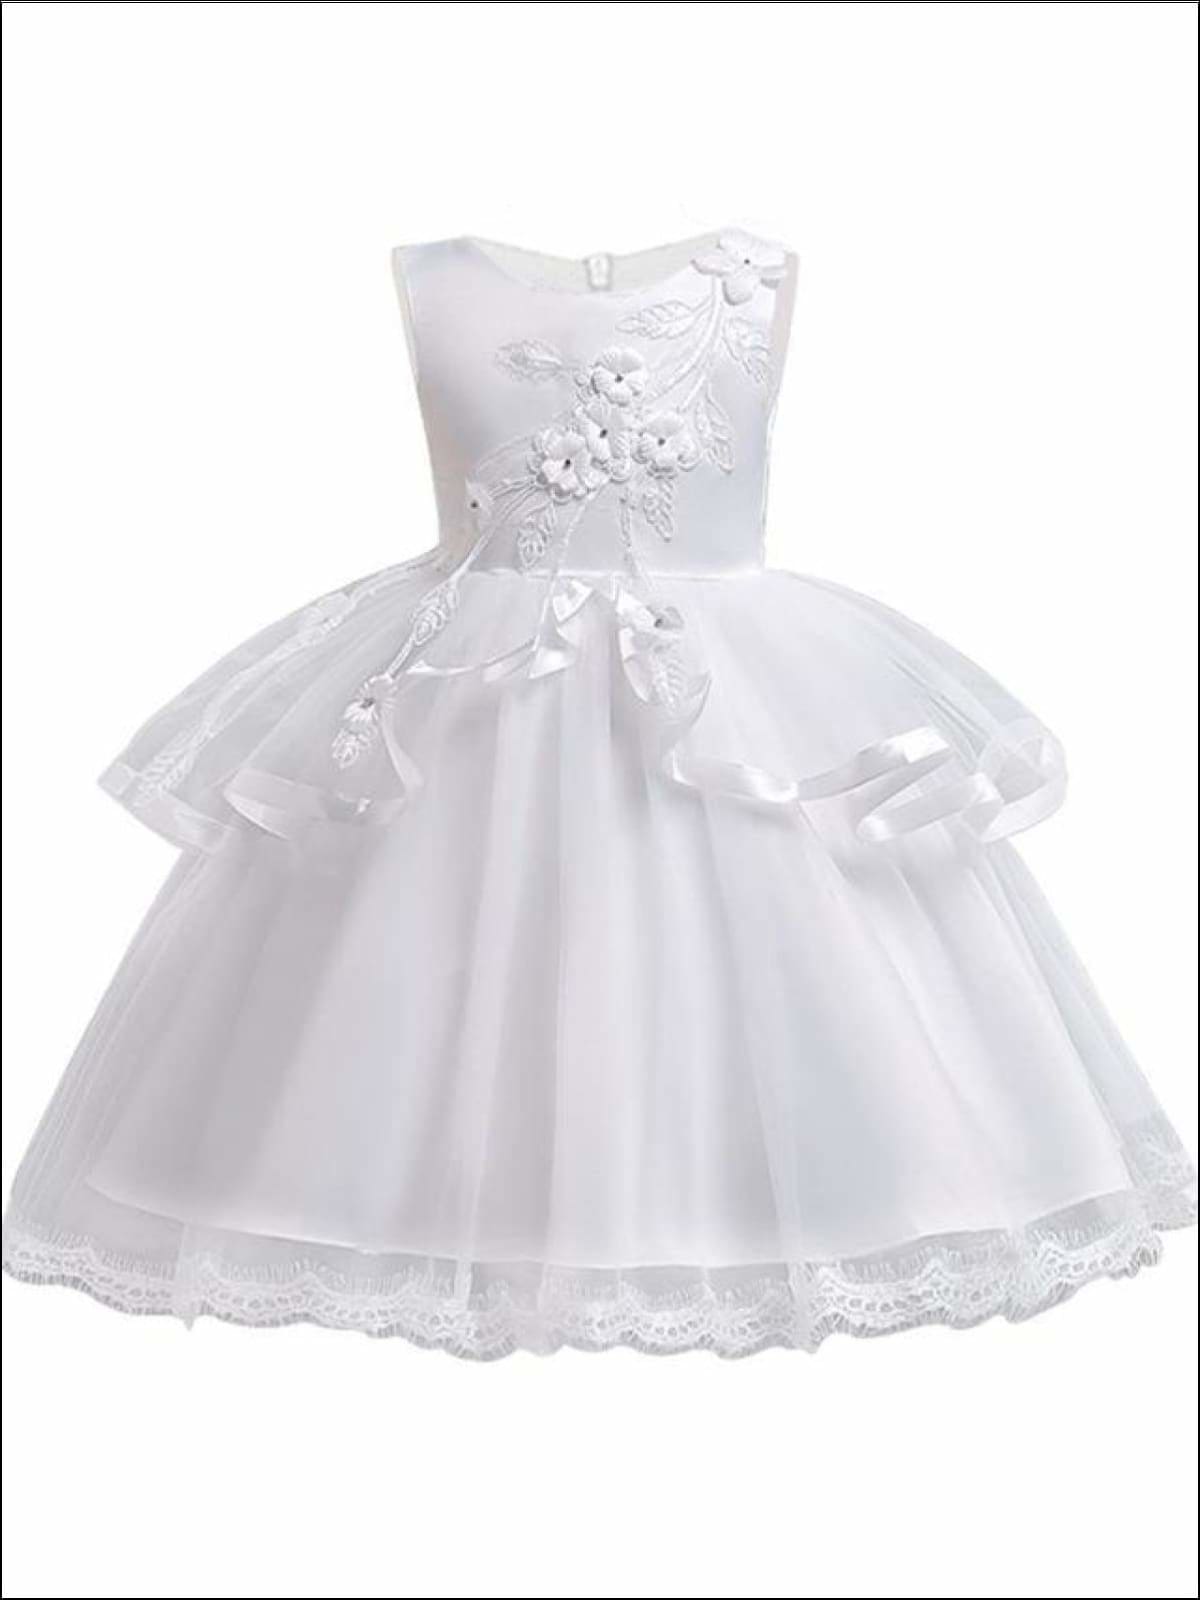 Girls Tiered Ruffle Flower Applique Special Occasion Dress - WHITE / 3T - Girls Dressy Dresses